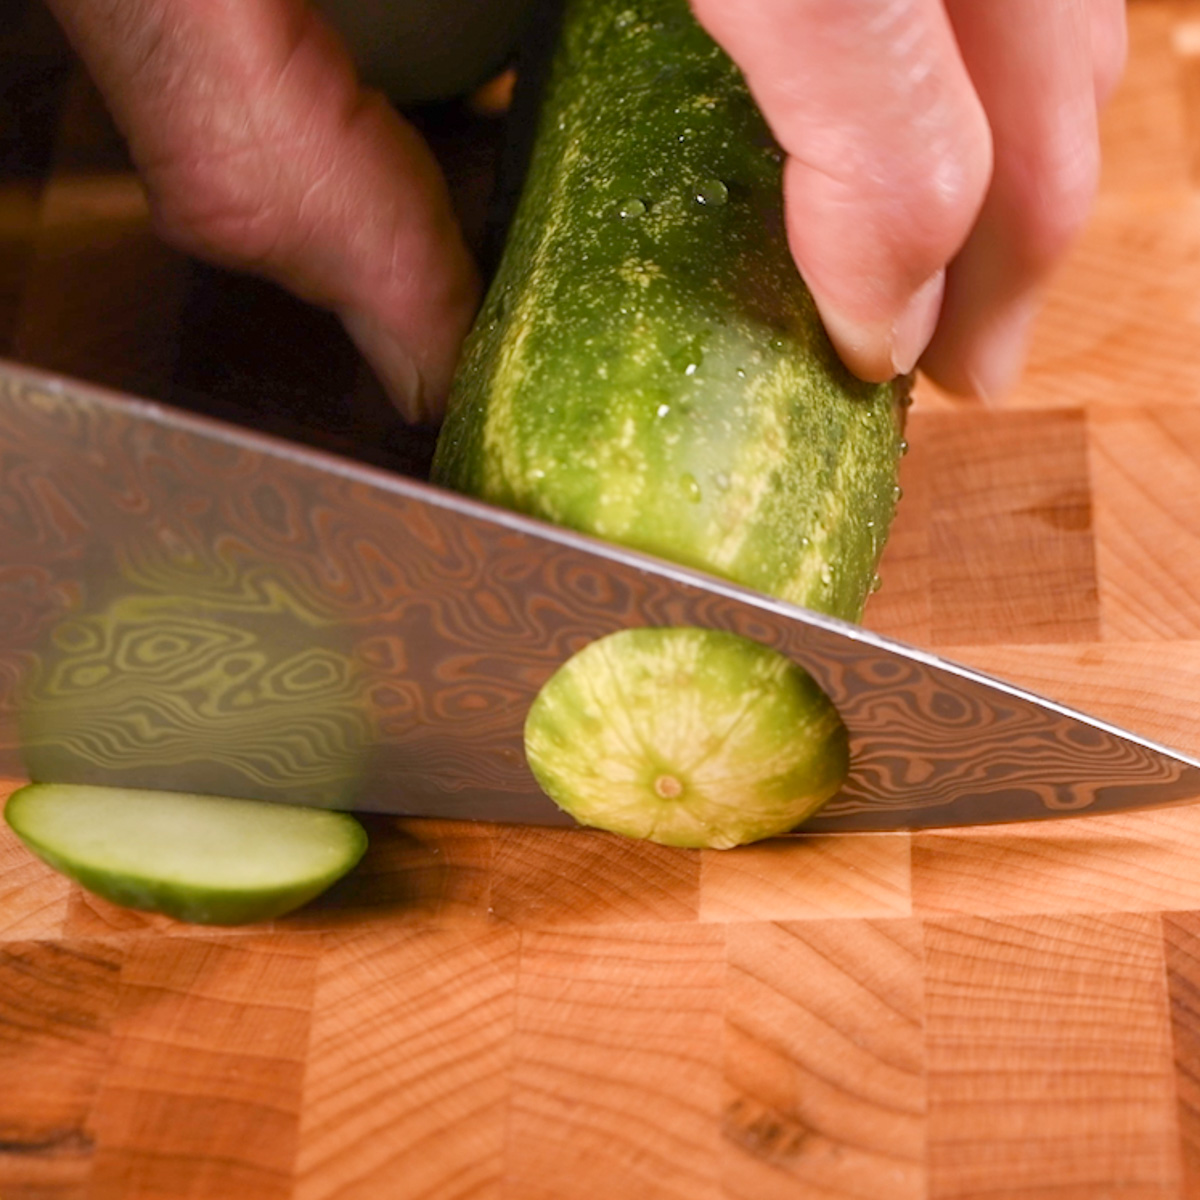 Trim off the ends of the cucumbers.